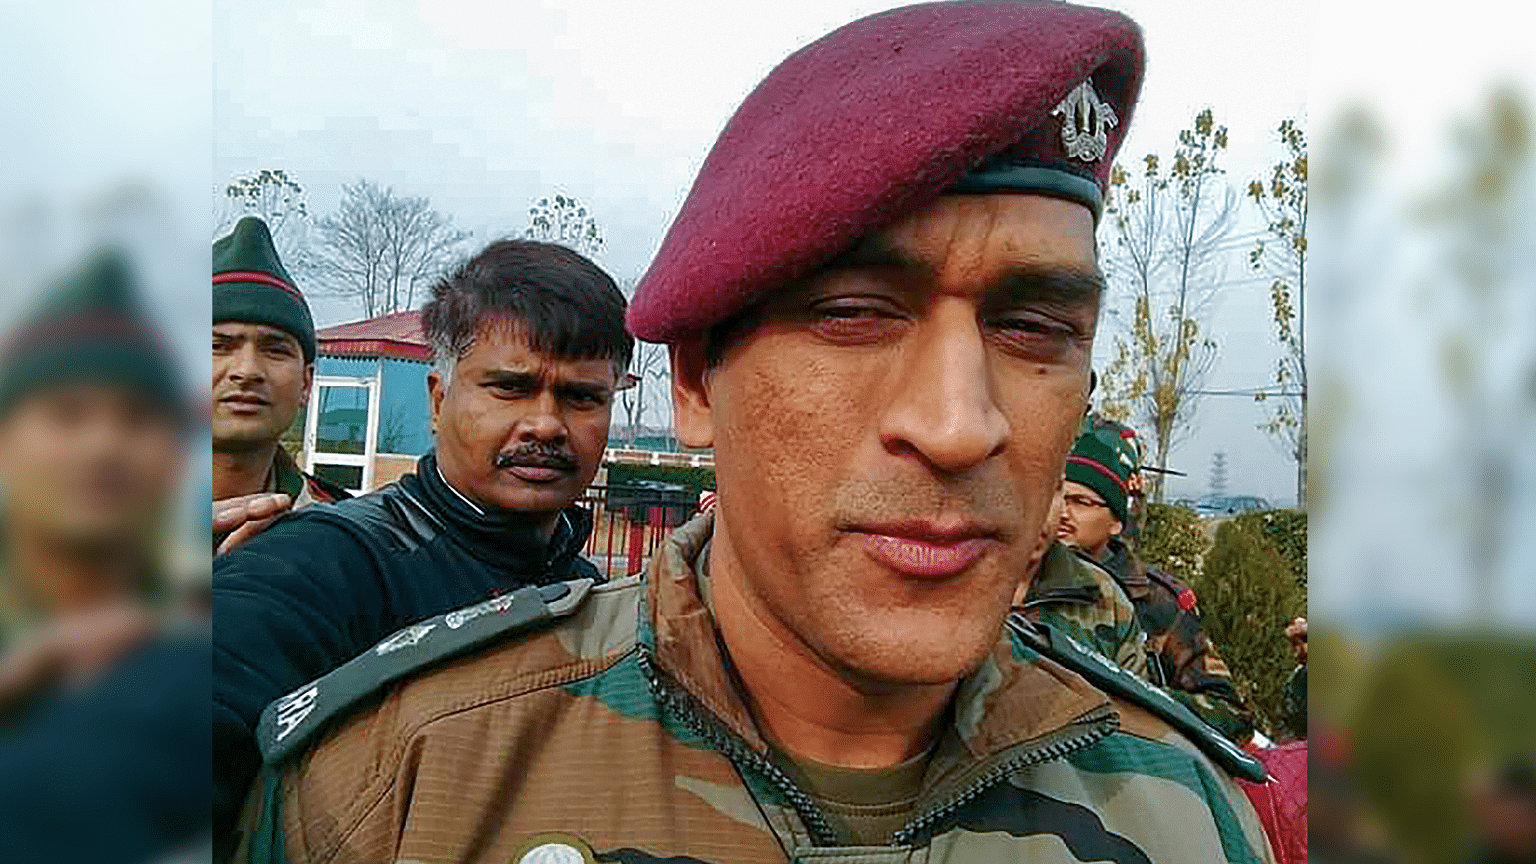 Indian cricketer MS Dhoni, an honorary lieutenant colonel in the Territorial Army is seen donning the army outfit in Srinagar.